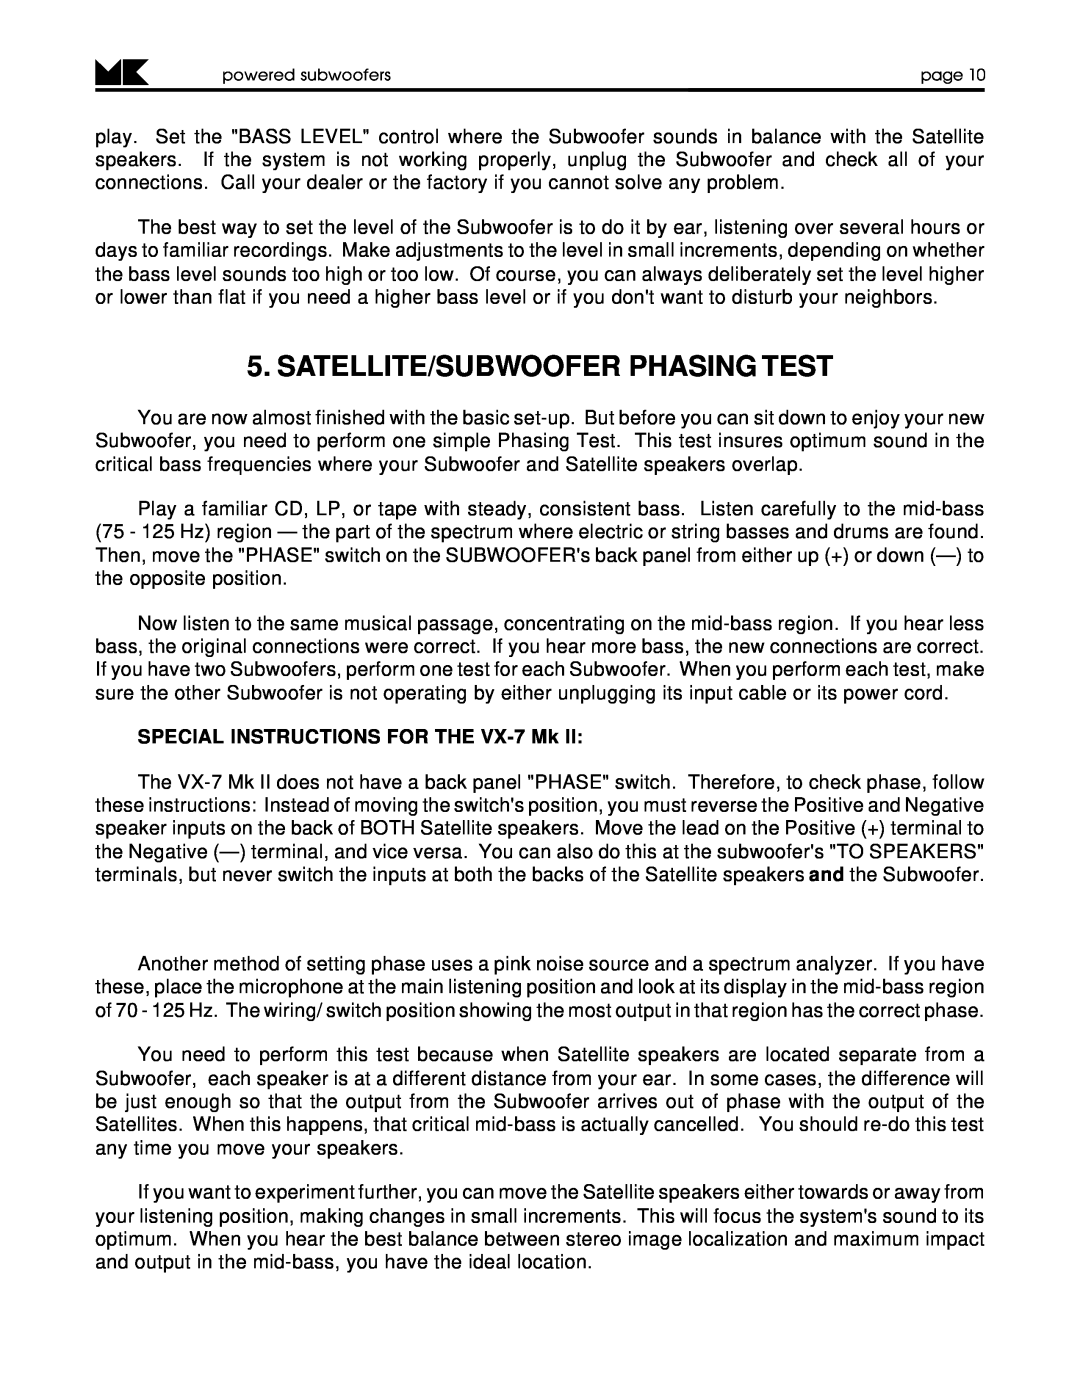 MK Sound MX-125 MK II, V-75 MK II, V-125, VX-7 MK II Satellite/Subwoofer Phasing Test, SPECIAL INSTRUCTIONS FOR THE VX-7Mk 